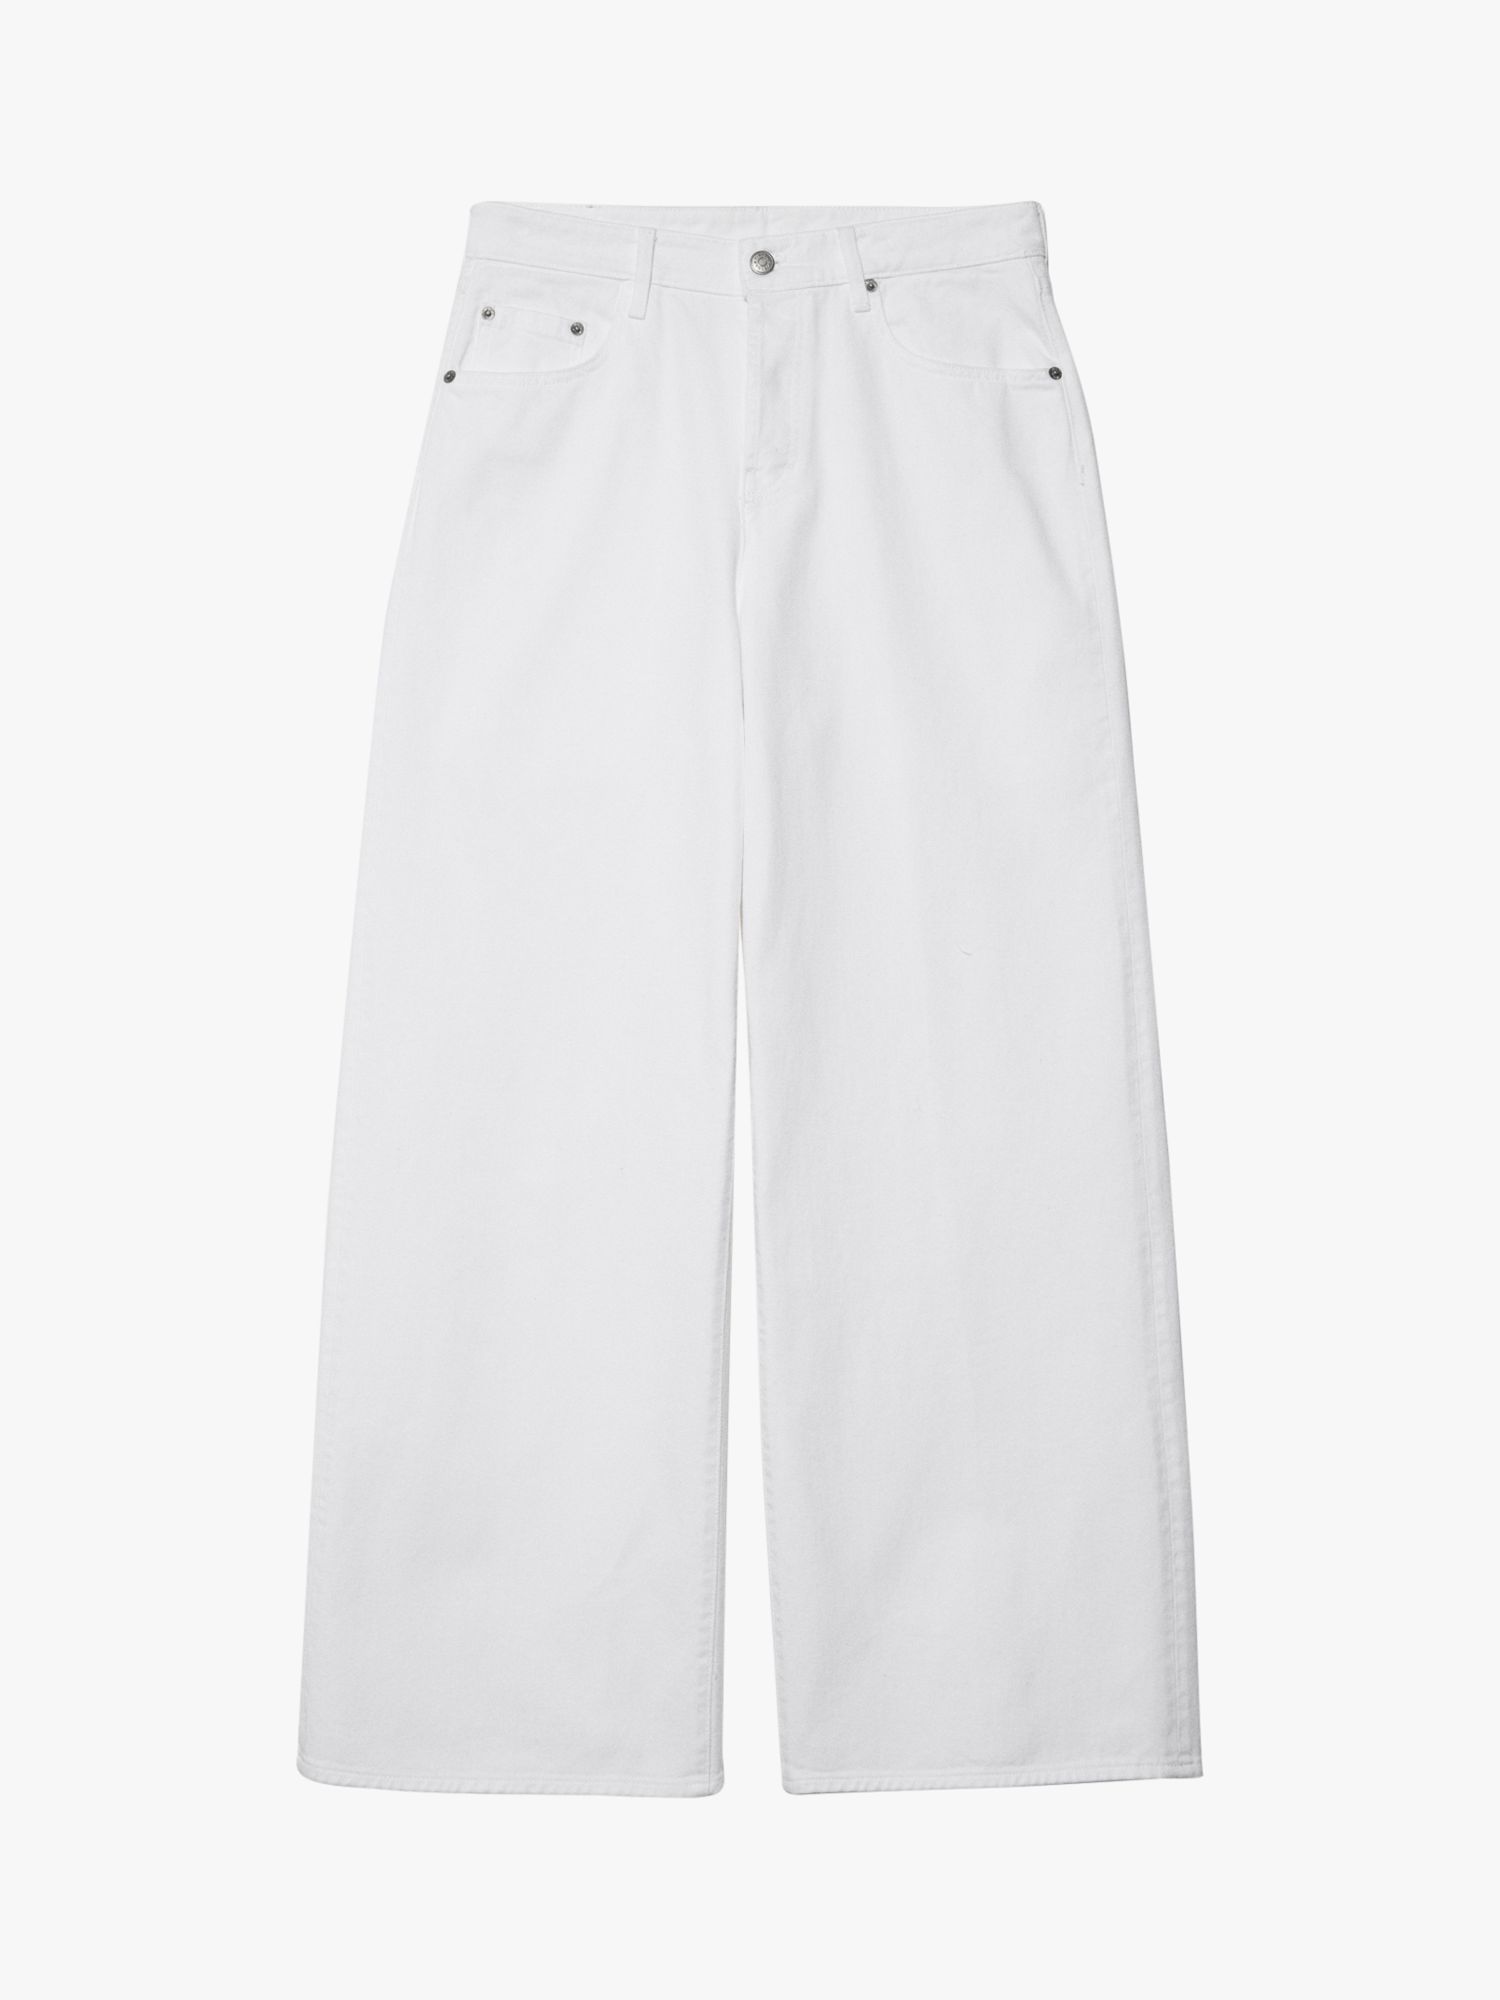 SISLEY Low Waist Wide Fit Jeans, White, 26R